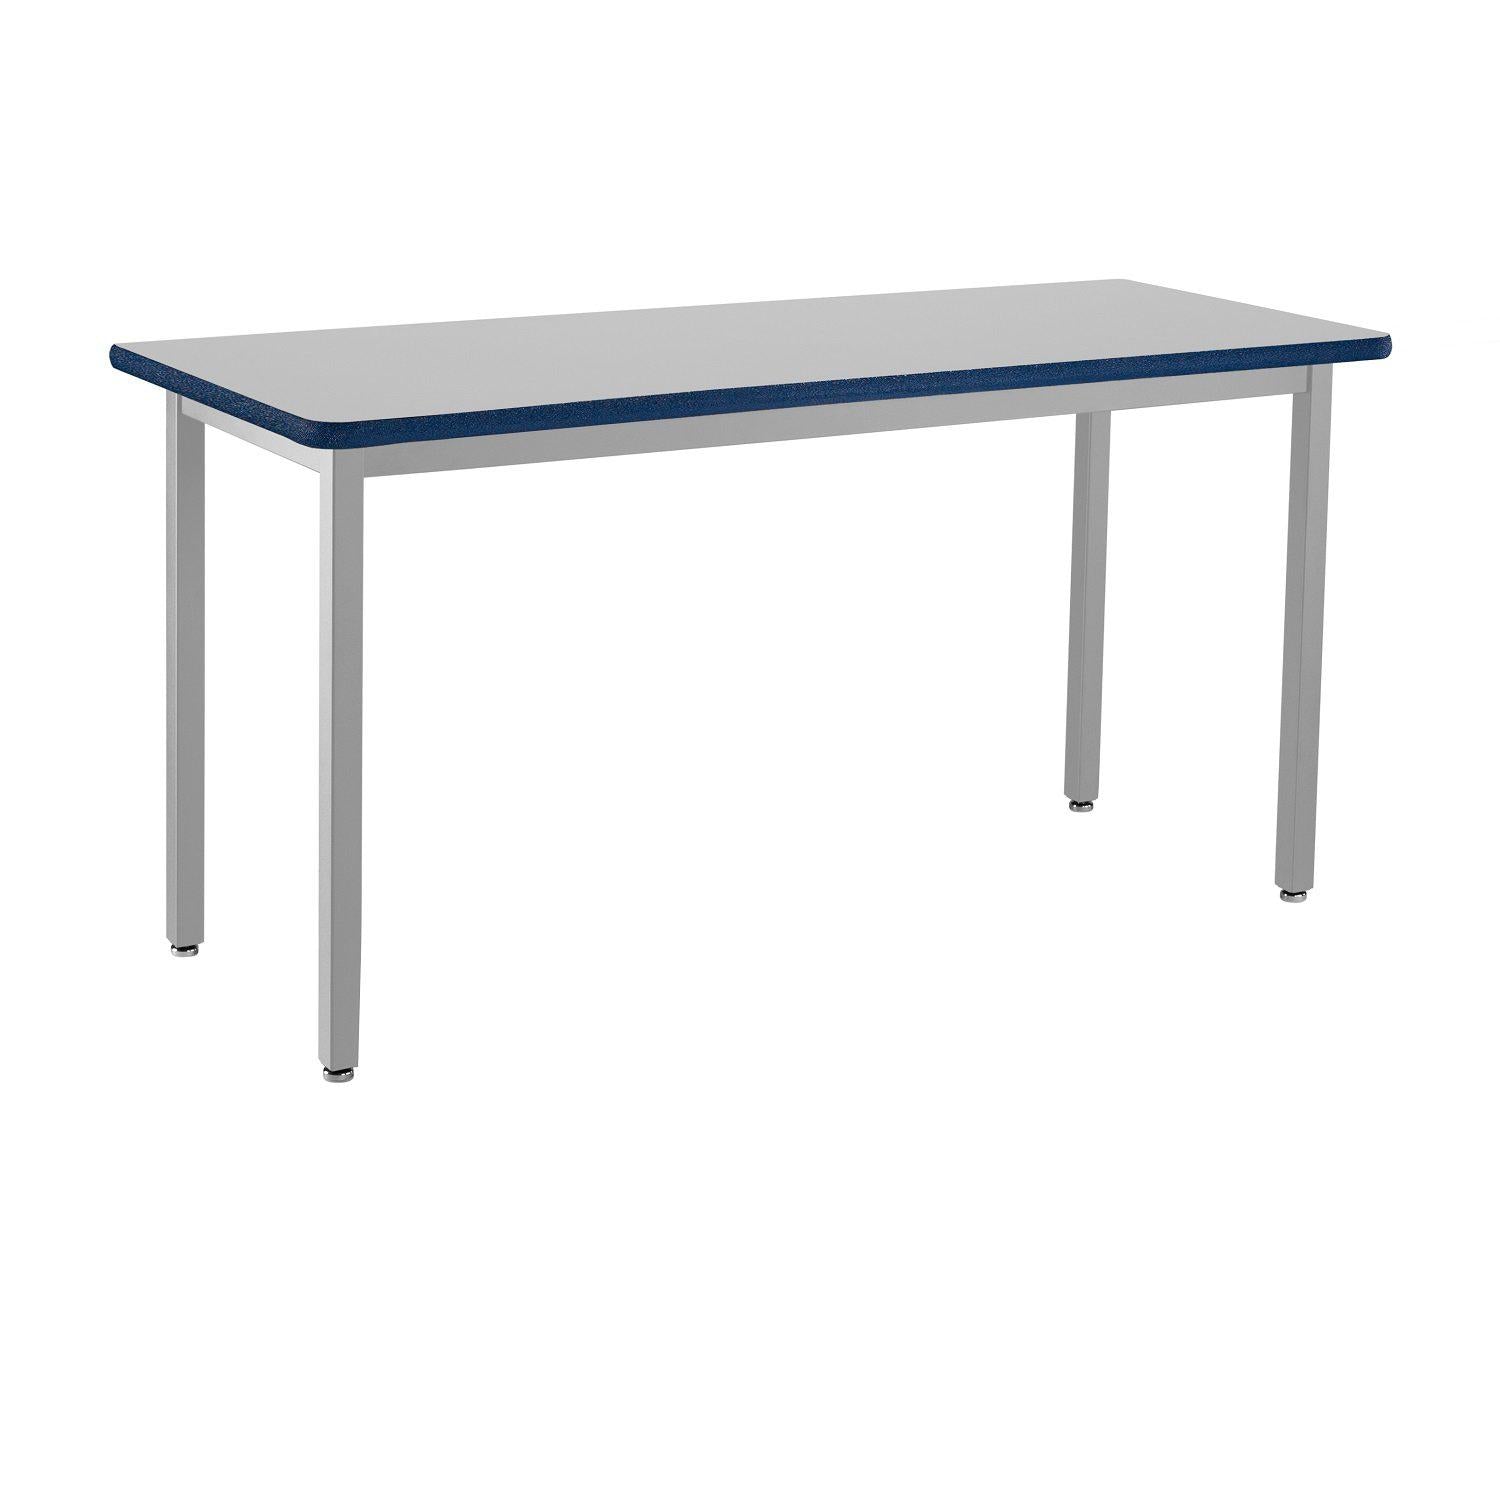 Heavy-Duty Fixed Height Utility Table, Soft Grey Frame, 30" x 60", Supreme High-Pressure Laminate Top with Black ProtectEdge